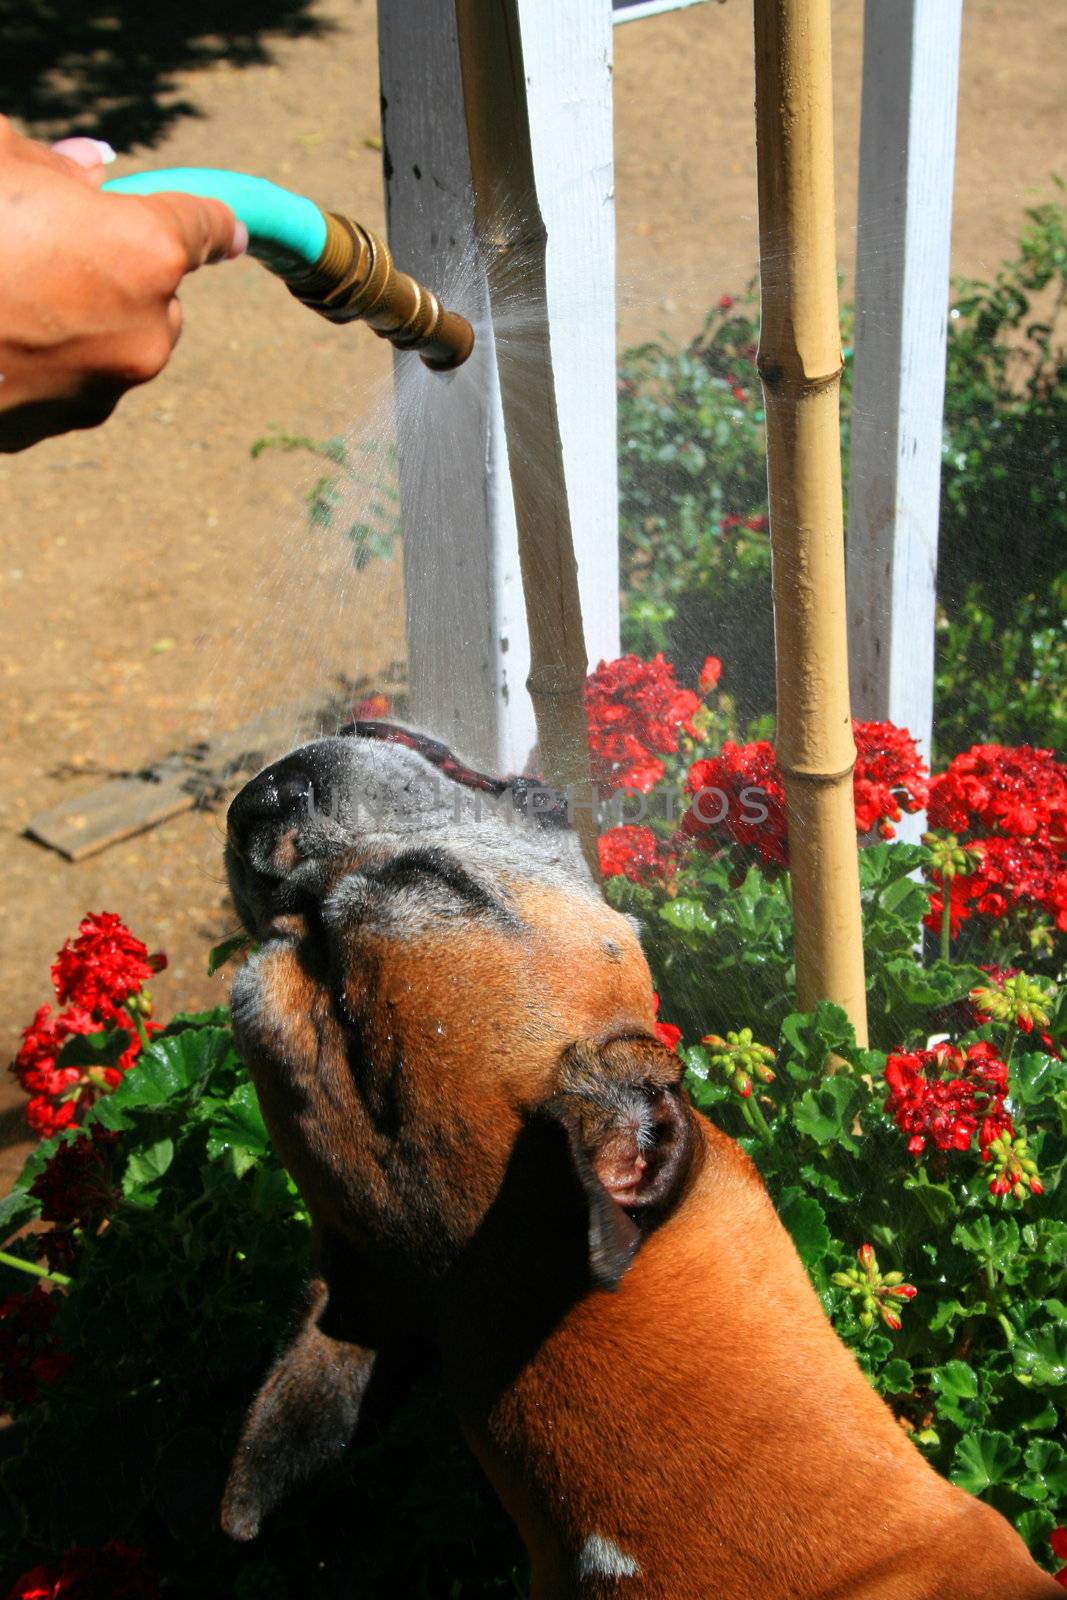 Boxer dog getting sparayed with a water hose outdoors.
